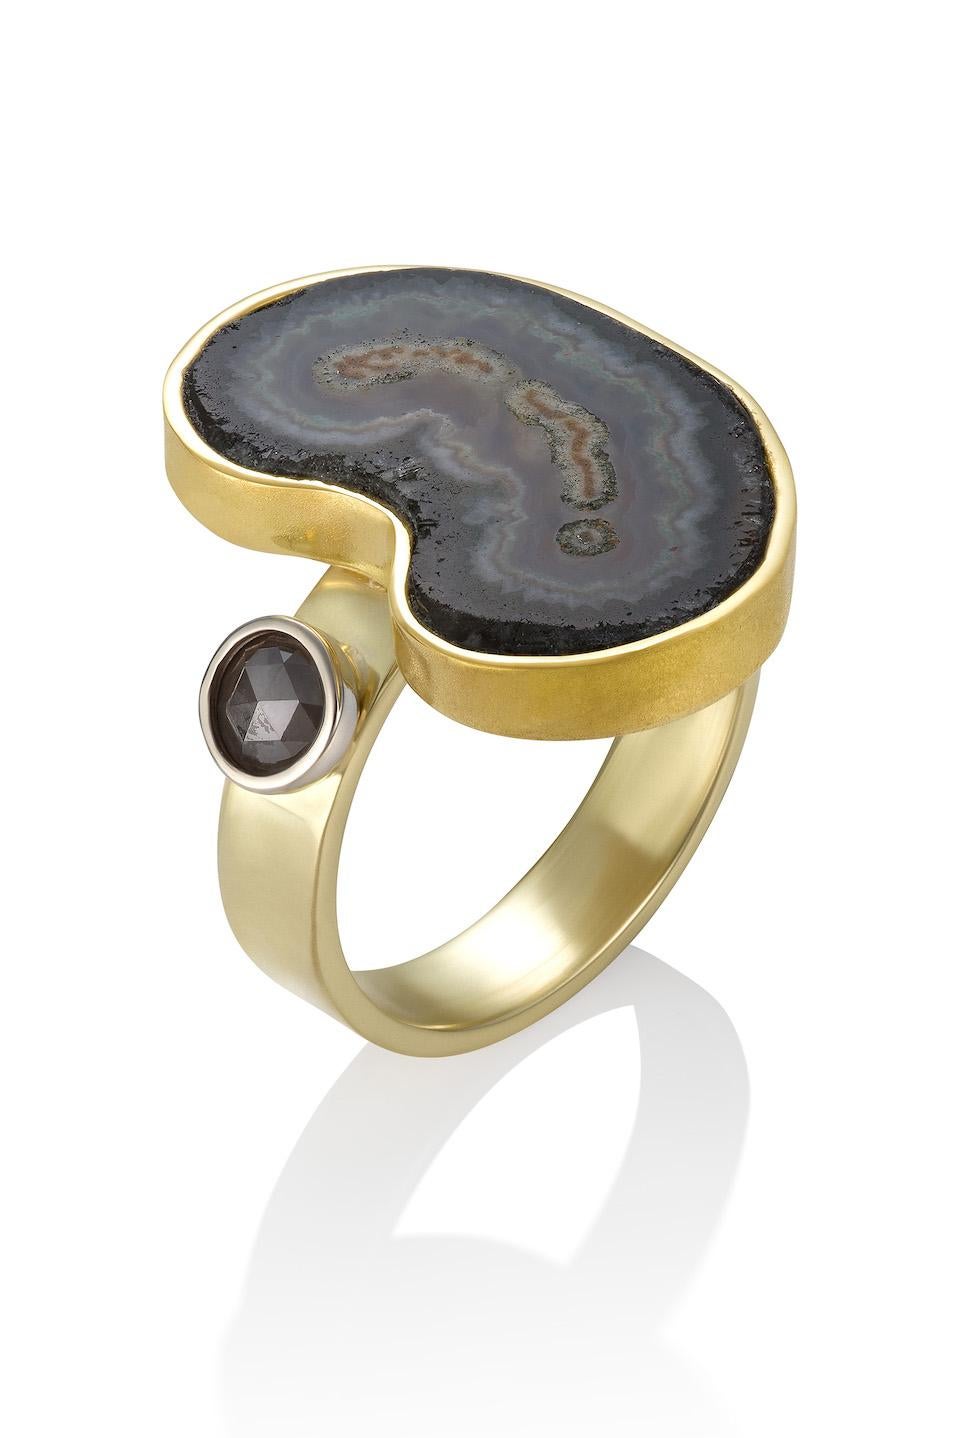 Agate slice combined with a rose cut gray diamond, 0.39 CTW. is a one-of-a-kind statement ring. The multi colored Agate slice is reflected in the multi colored gold colors chosen to creating this one-of-a-kind ring. 18K bright yellow gold for the